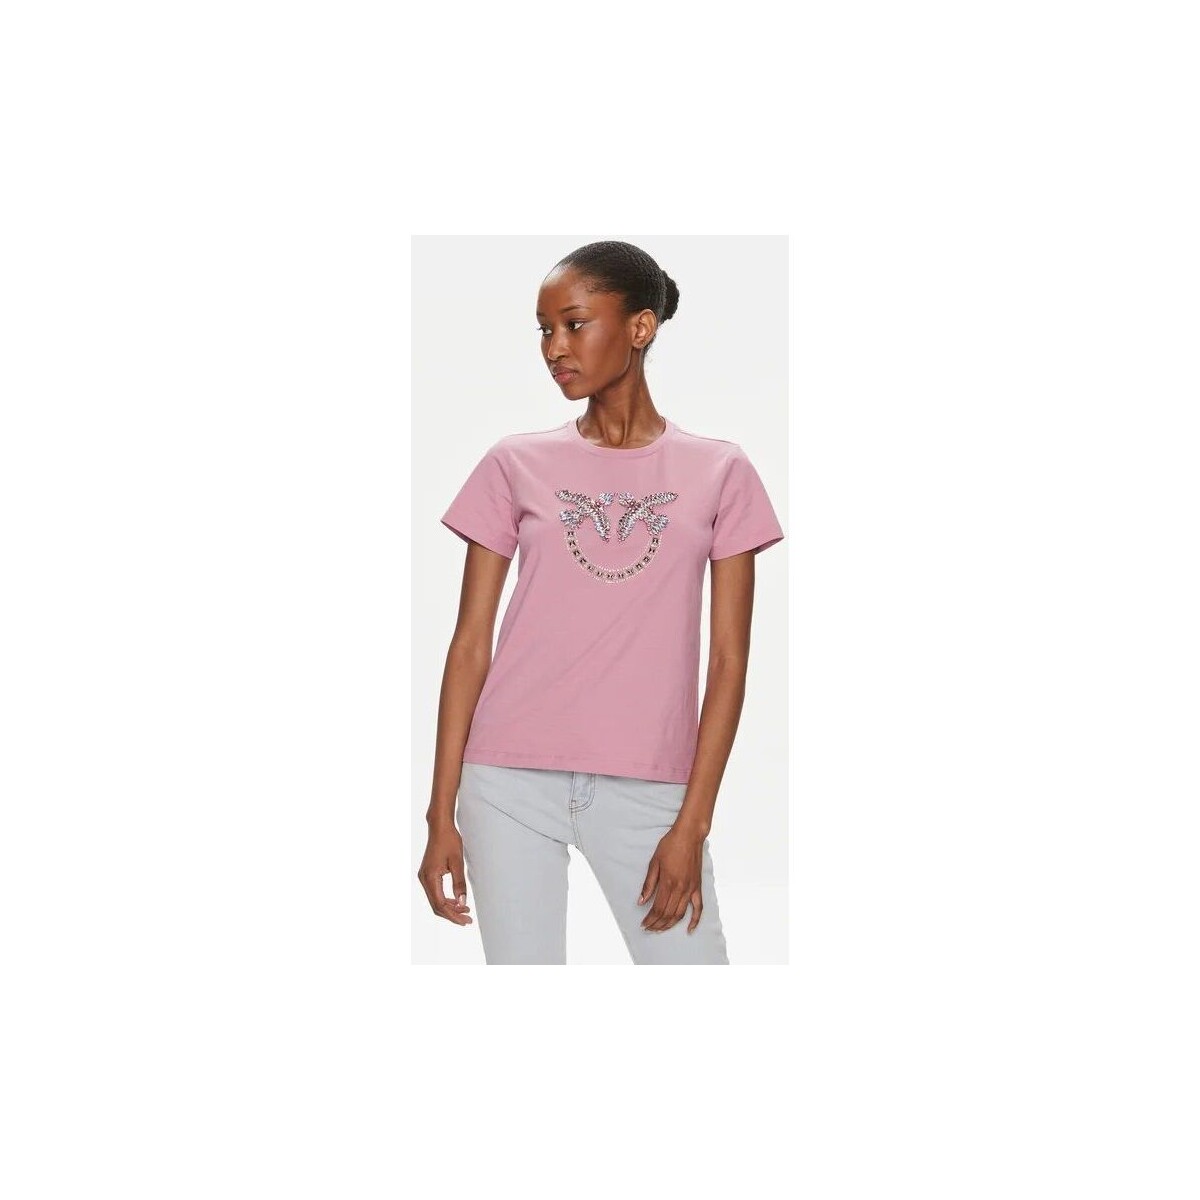 textil Mujer Tops y Camisetas Pinko QUENTIN 100535 A1R7-N98 Rosa